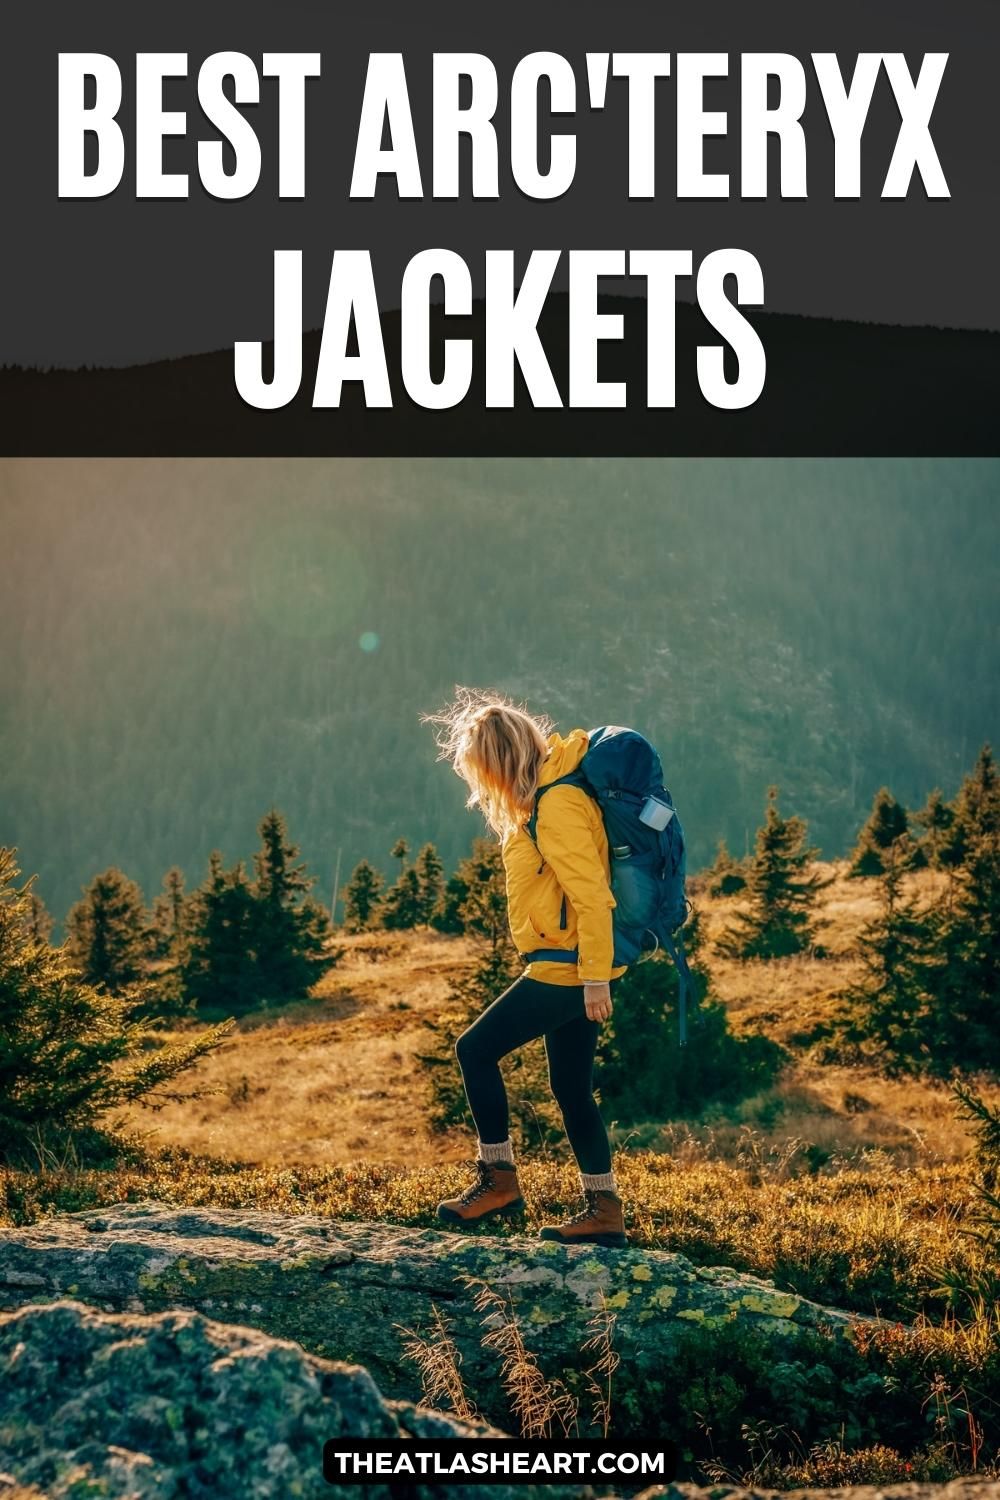 A blonde woman seen in profile wearing a yellow windbreaker, black leggings, and a blue backpack hiking over mountainous terrain in golden afternoon light, with the text overlay, "Best Arc'teryx Jacket."